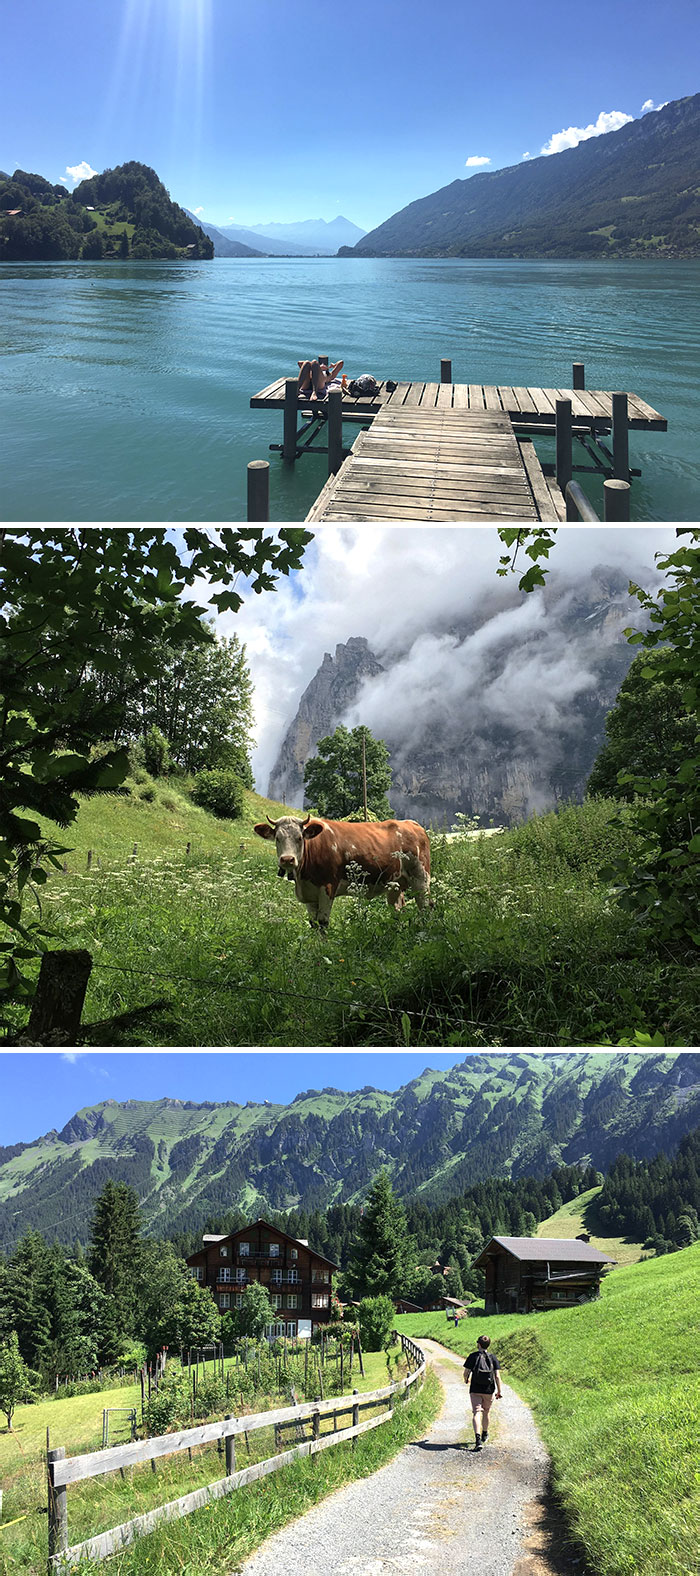 Recently Drove Through Southern Switzerland, From Geneva To Zurich, After Seeing A Picture Of The Lauterbrunnen Valley. Here Are A Few Pictures From The Trip